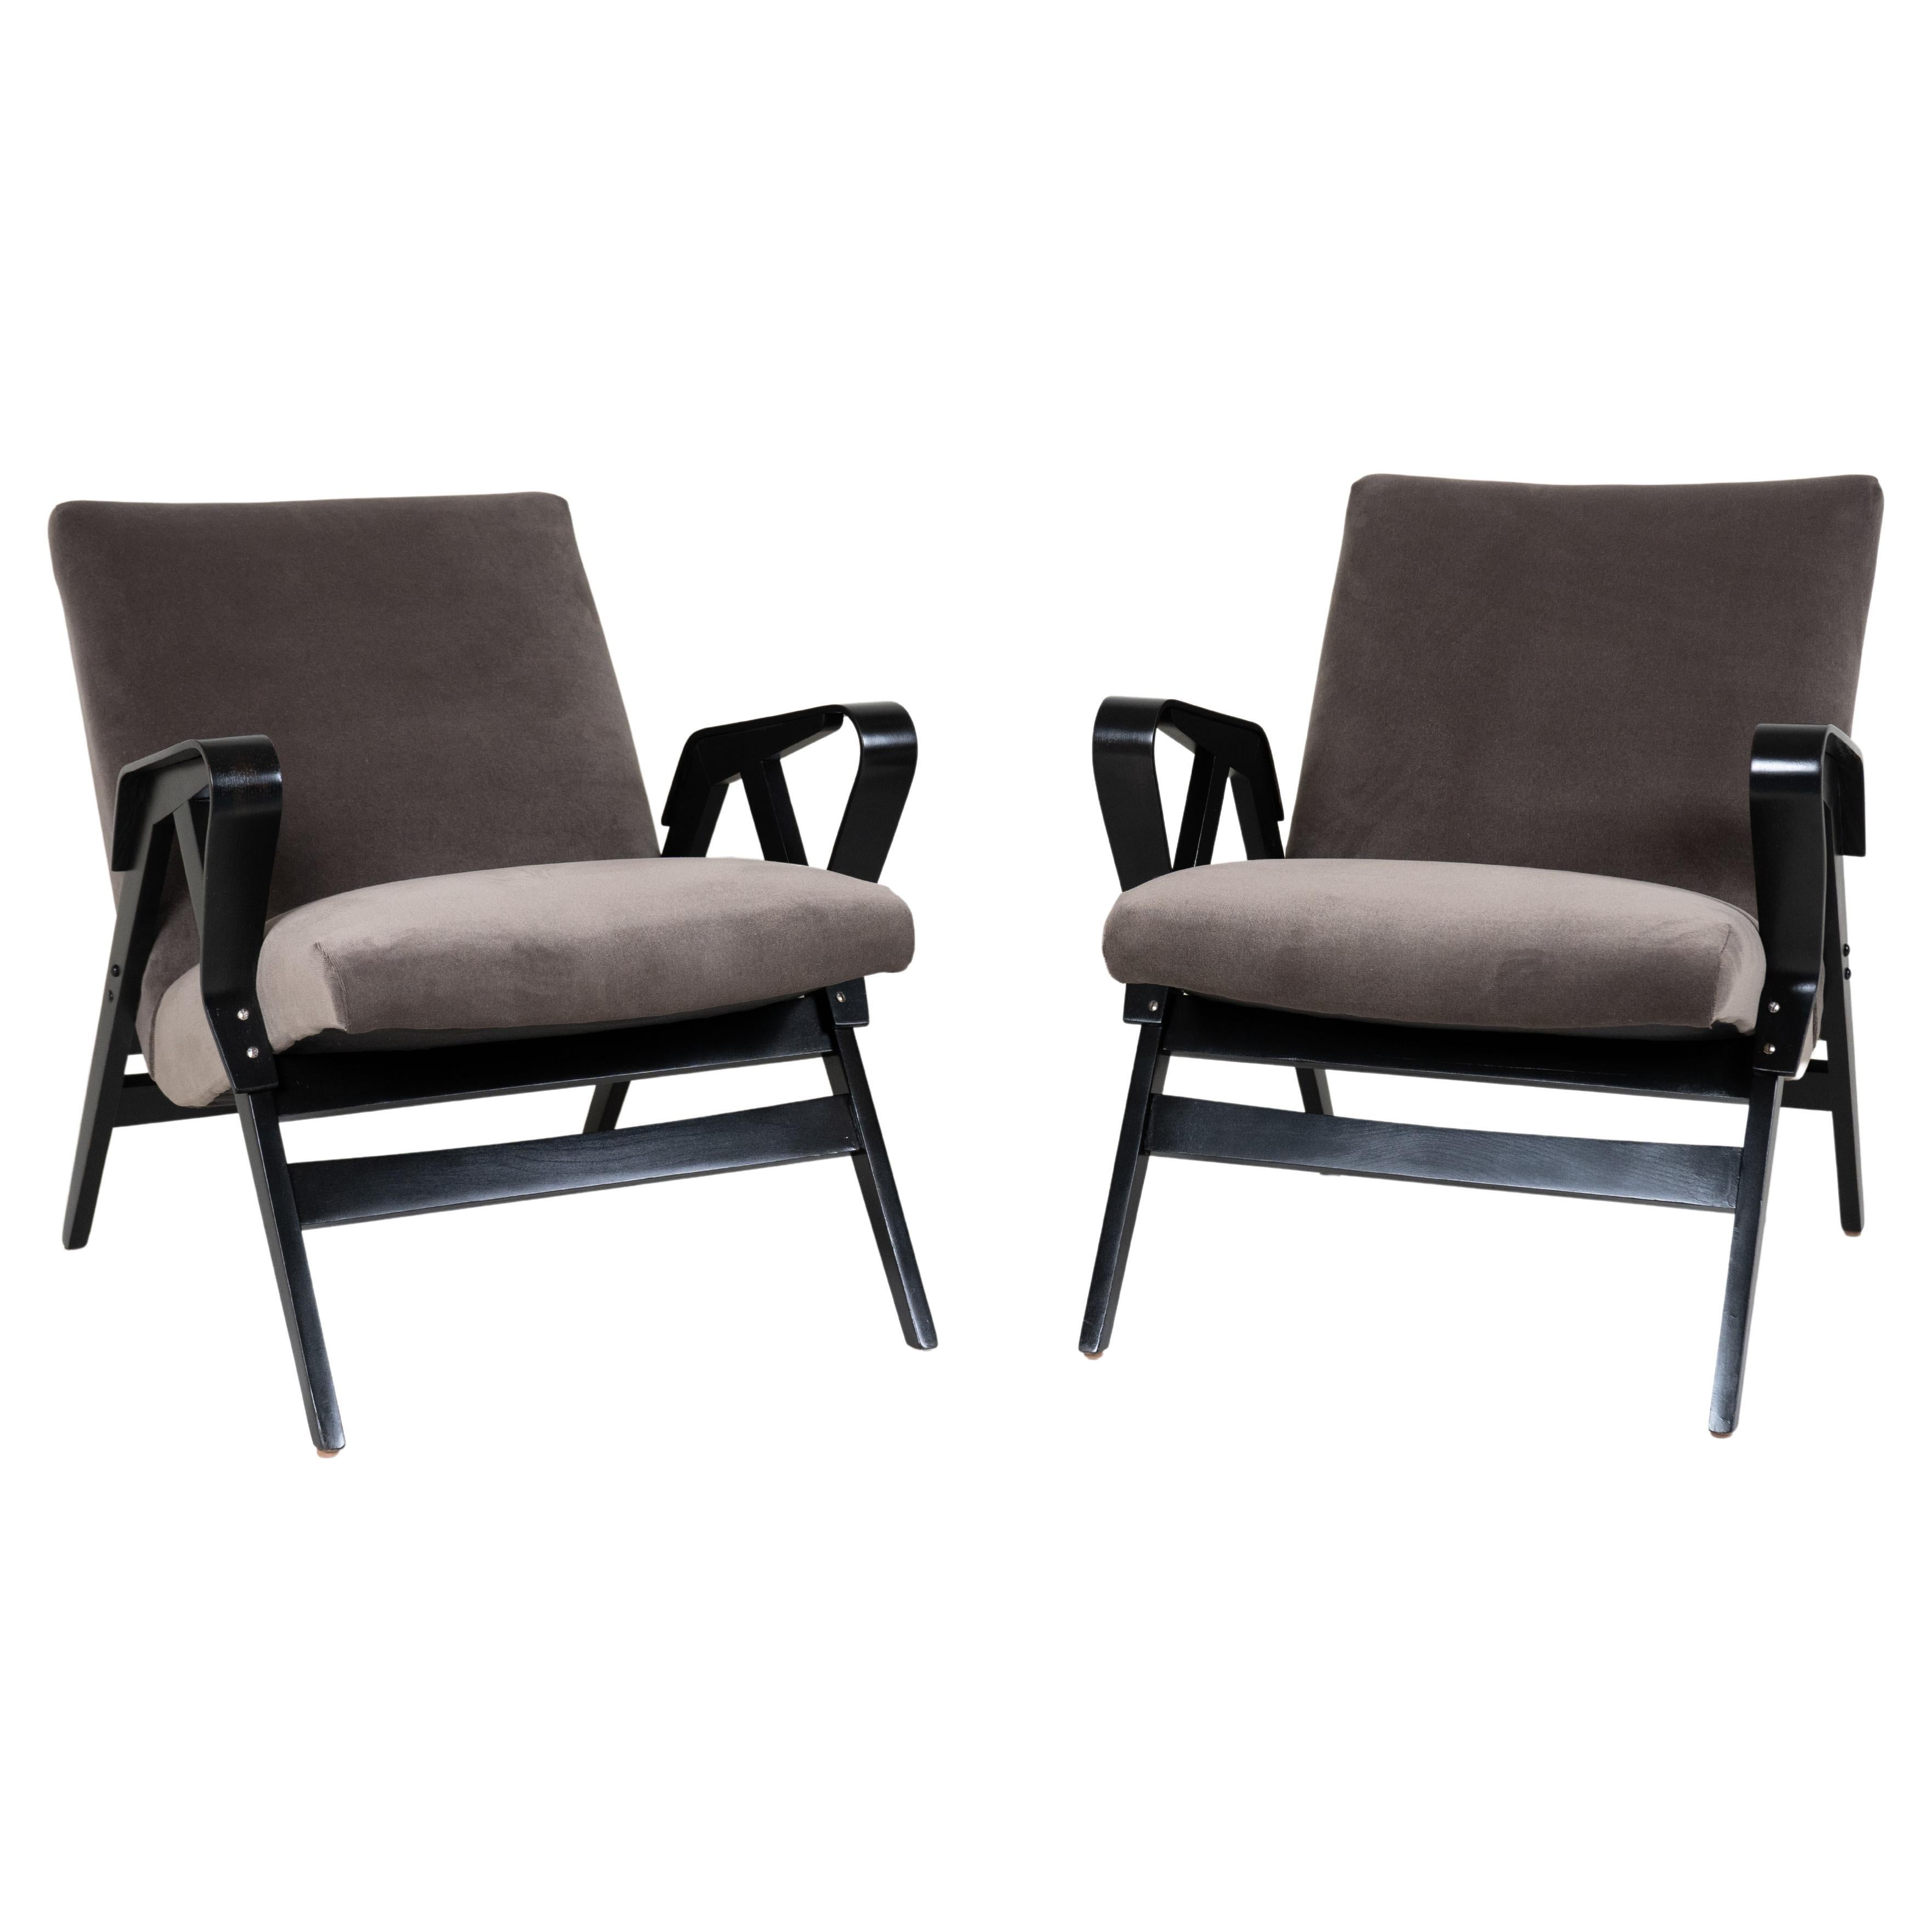 A Pair of Mid-Century Socialist Lounge Chairs For Sale